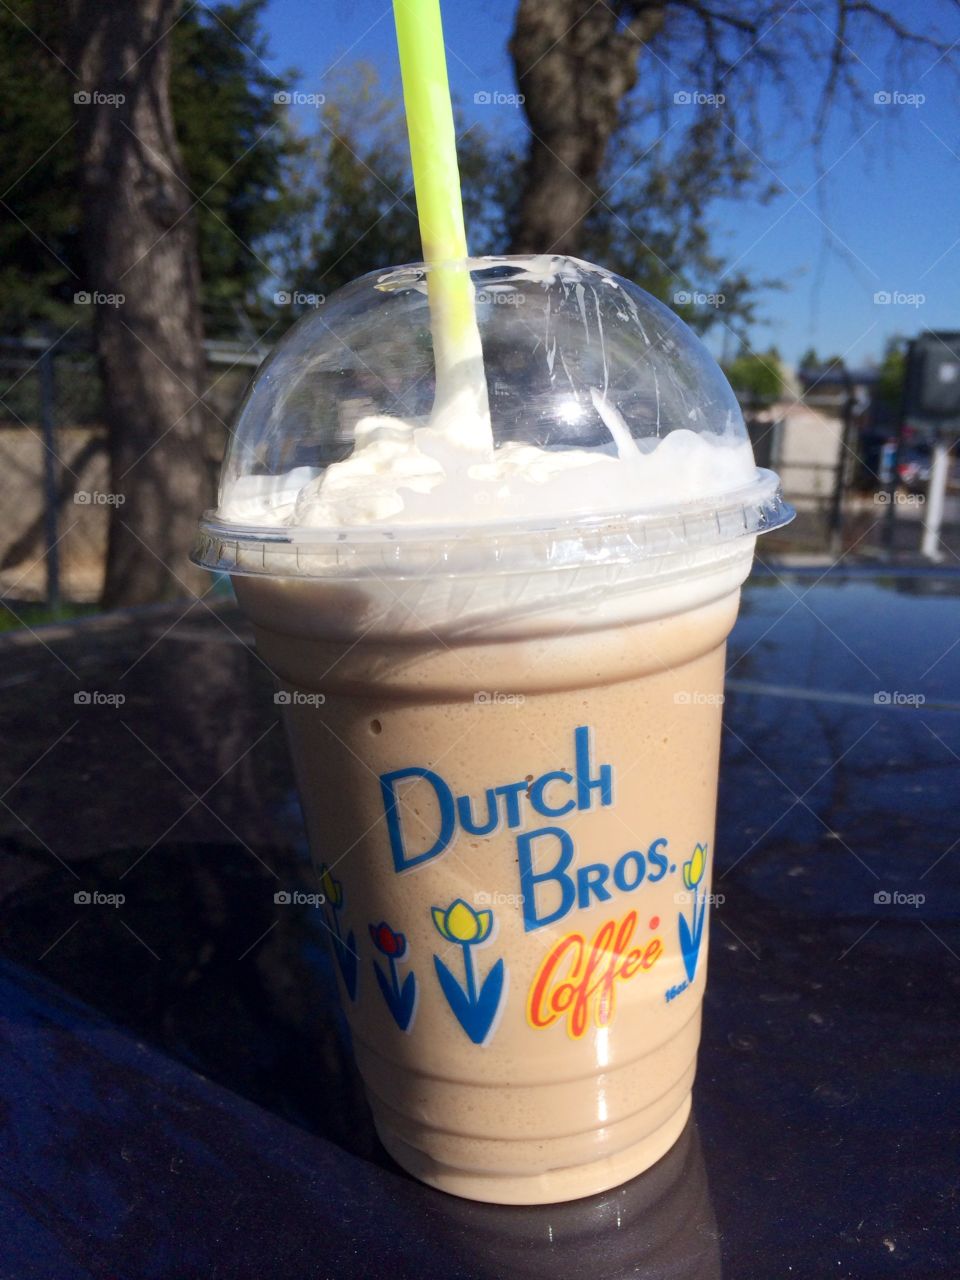 First Dutch brothers . My first Dutch brothers coffee ever